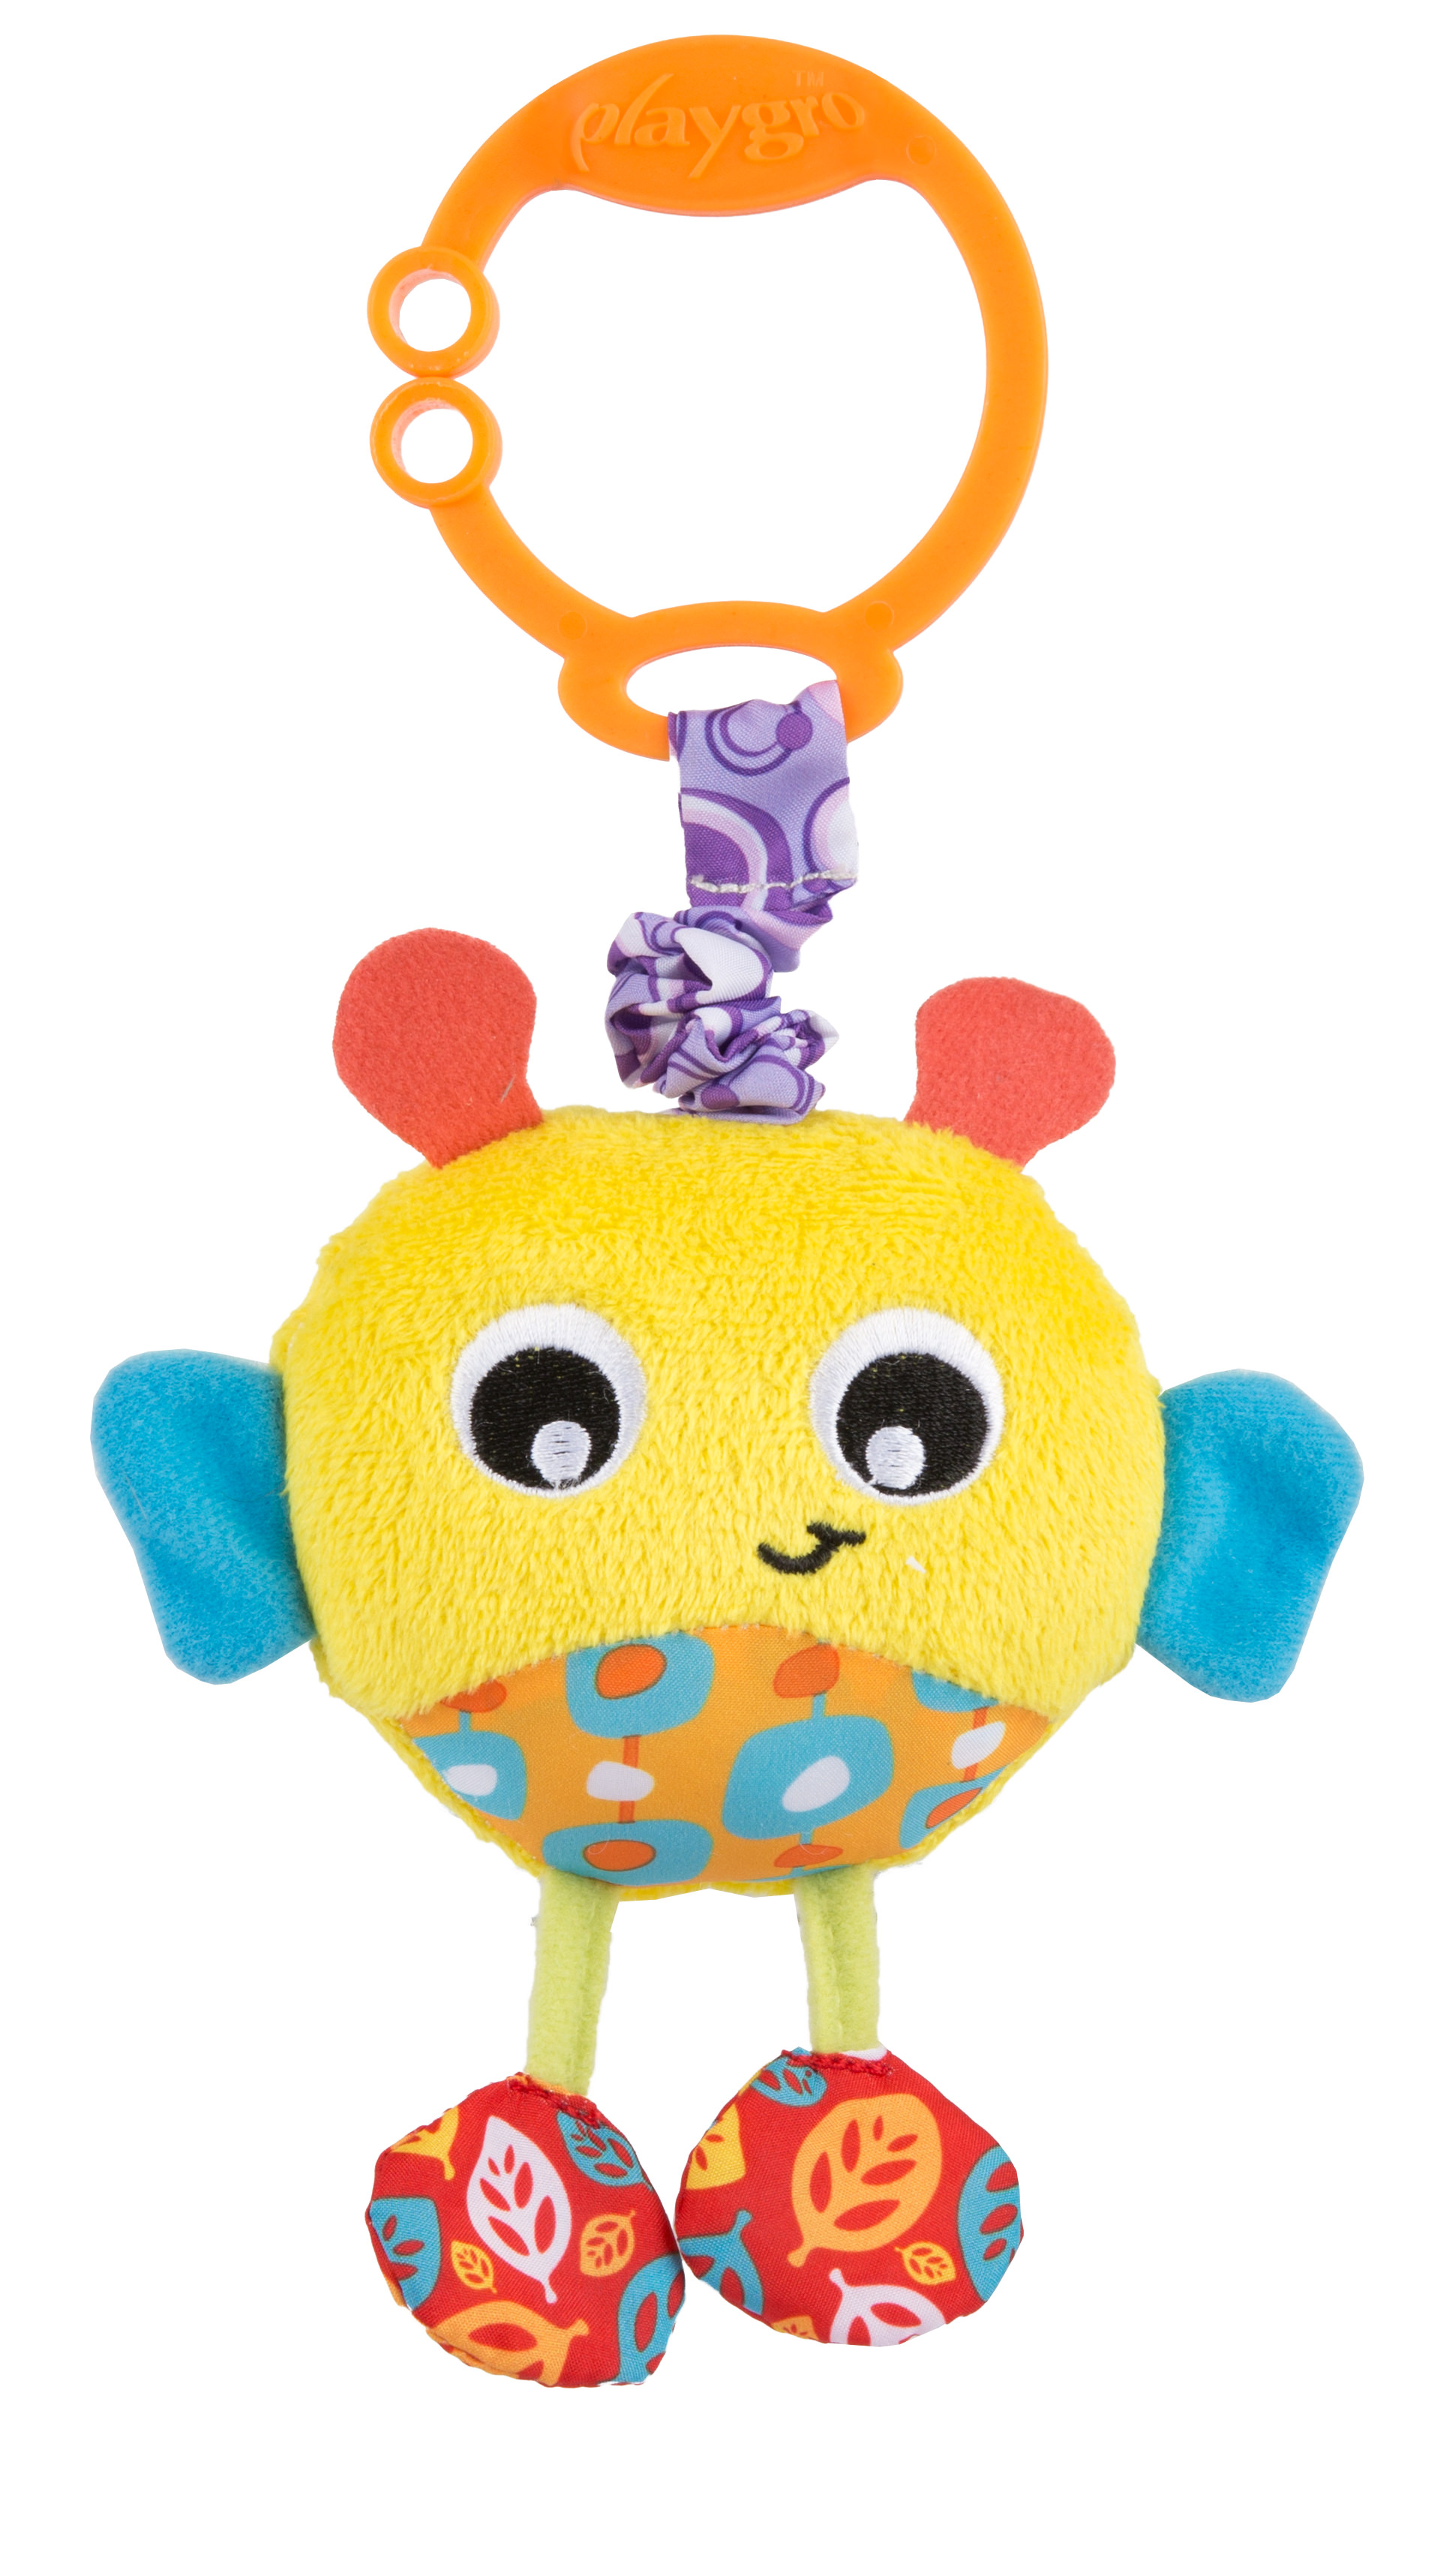 Playgro Wiggling Bertie Bee, STEM Toy for a bright future - image 1 of 2